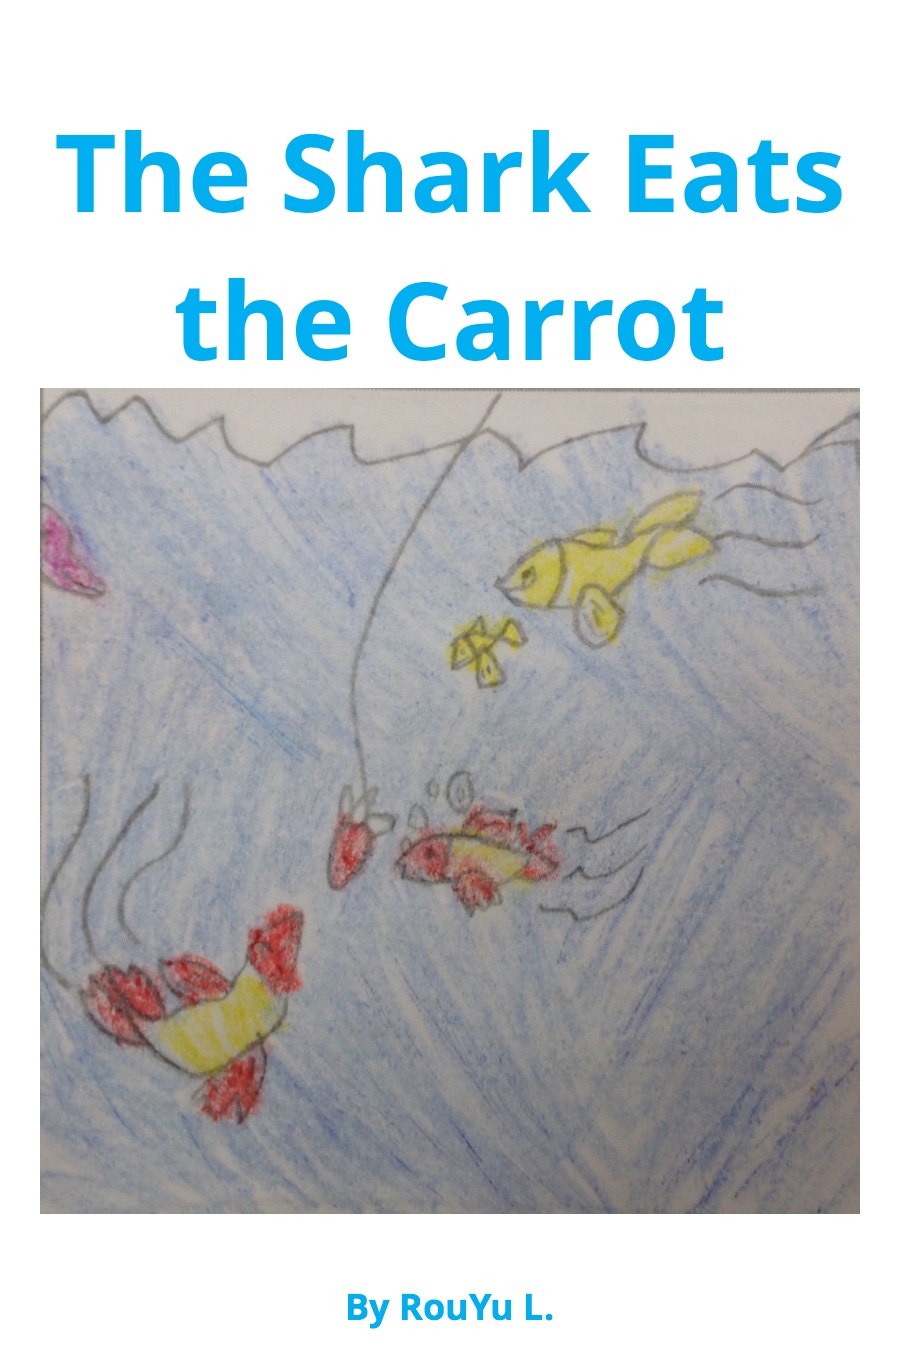 The Shark Eats the Carrot by RouYu L